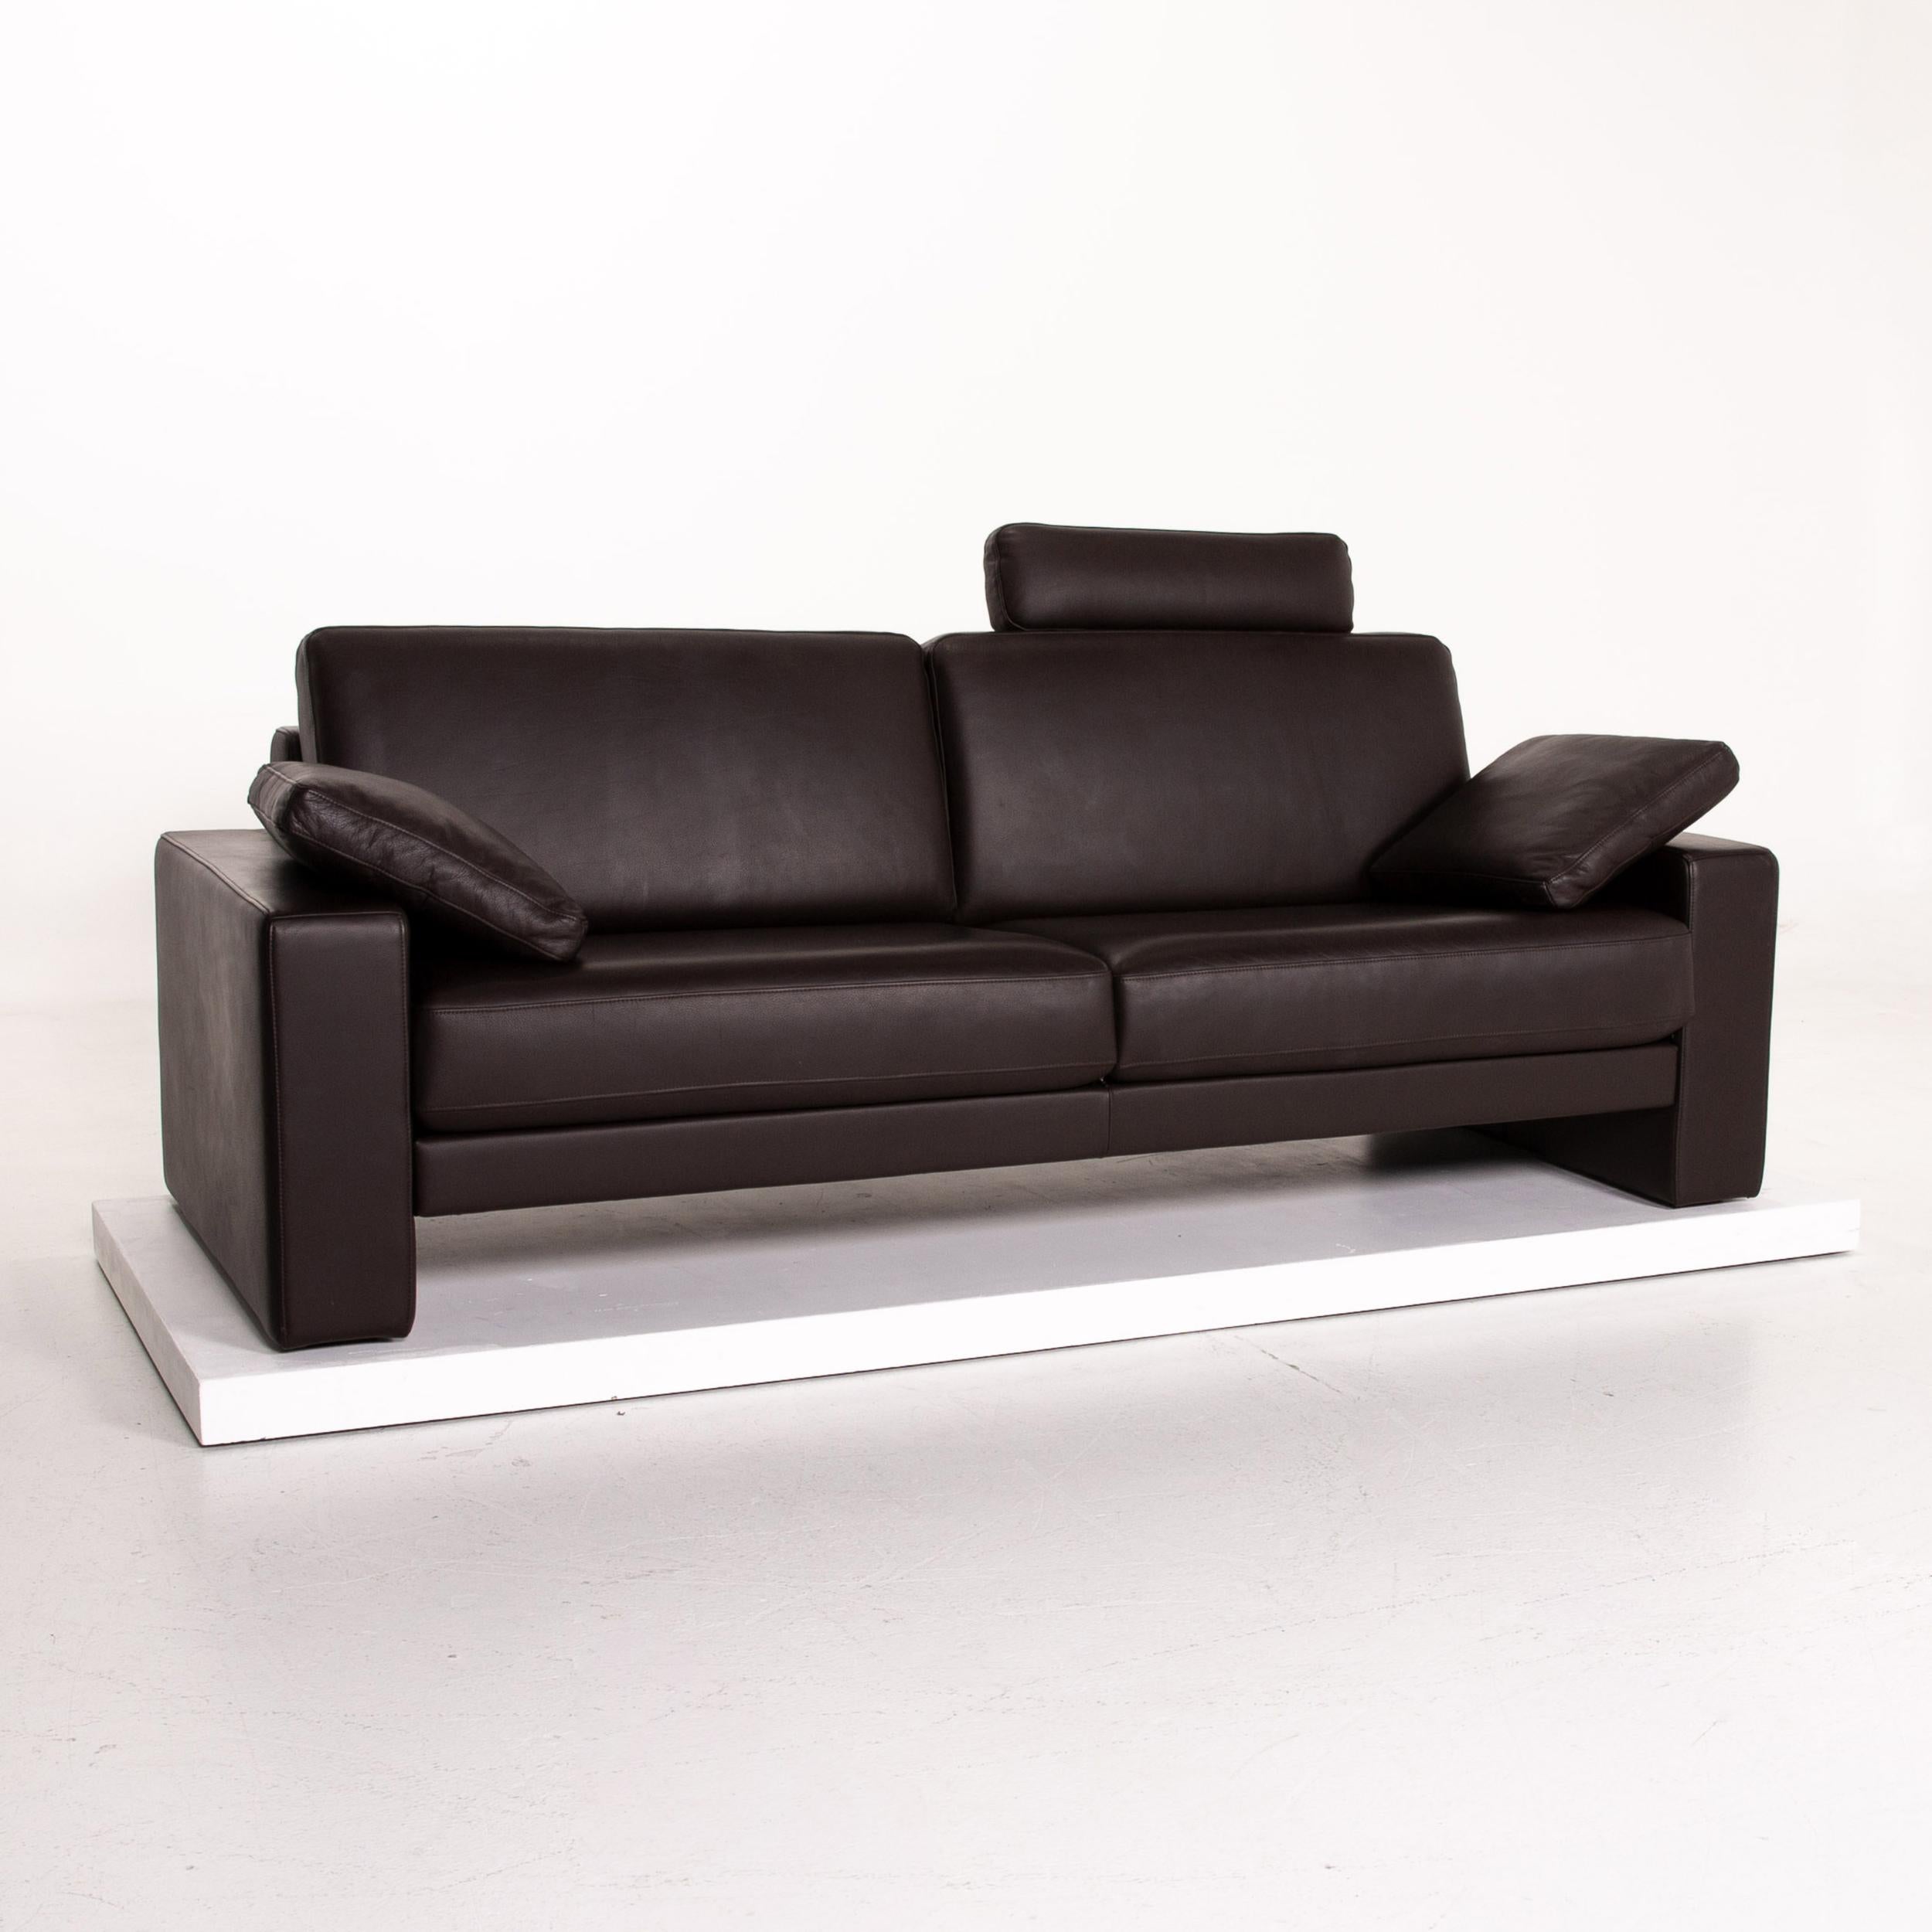 German Rolf Benz Ego Leather Sofa Dark Brown Three-Seat Couch For Sale